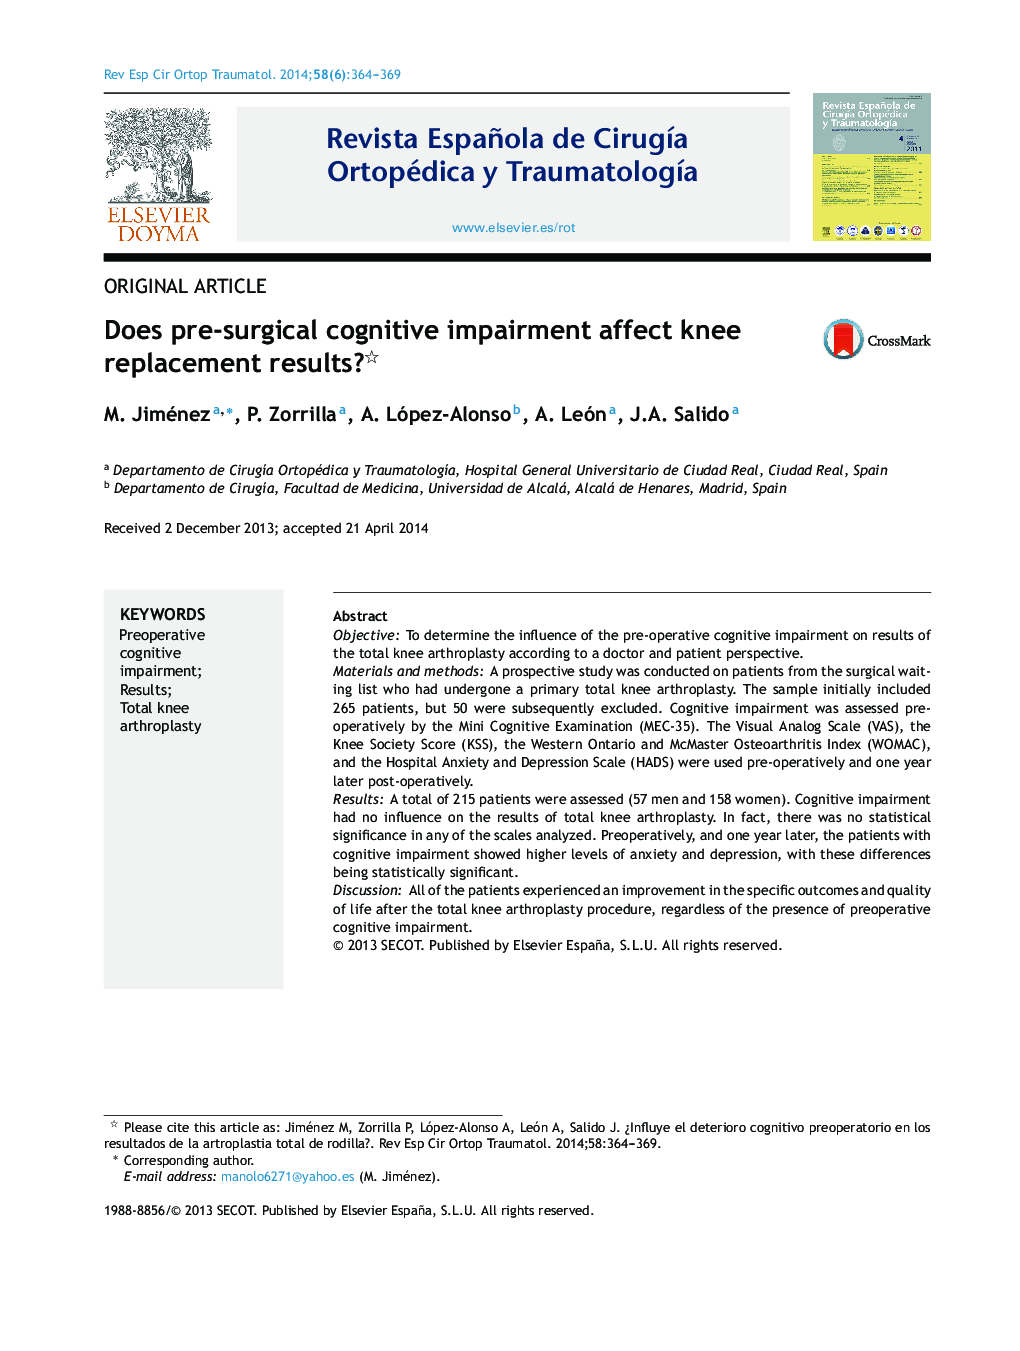 Does pre-surgical cognitive impairment affect knee replacement results? 